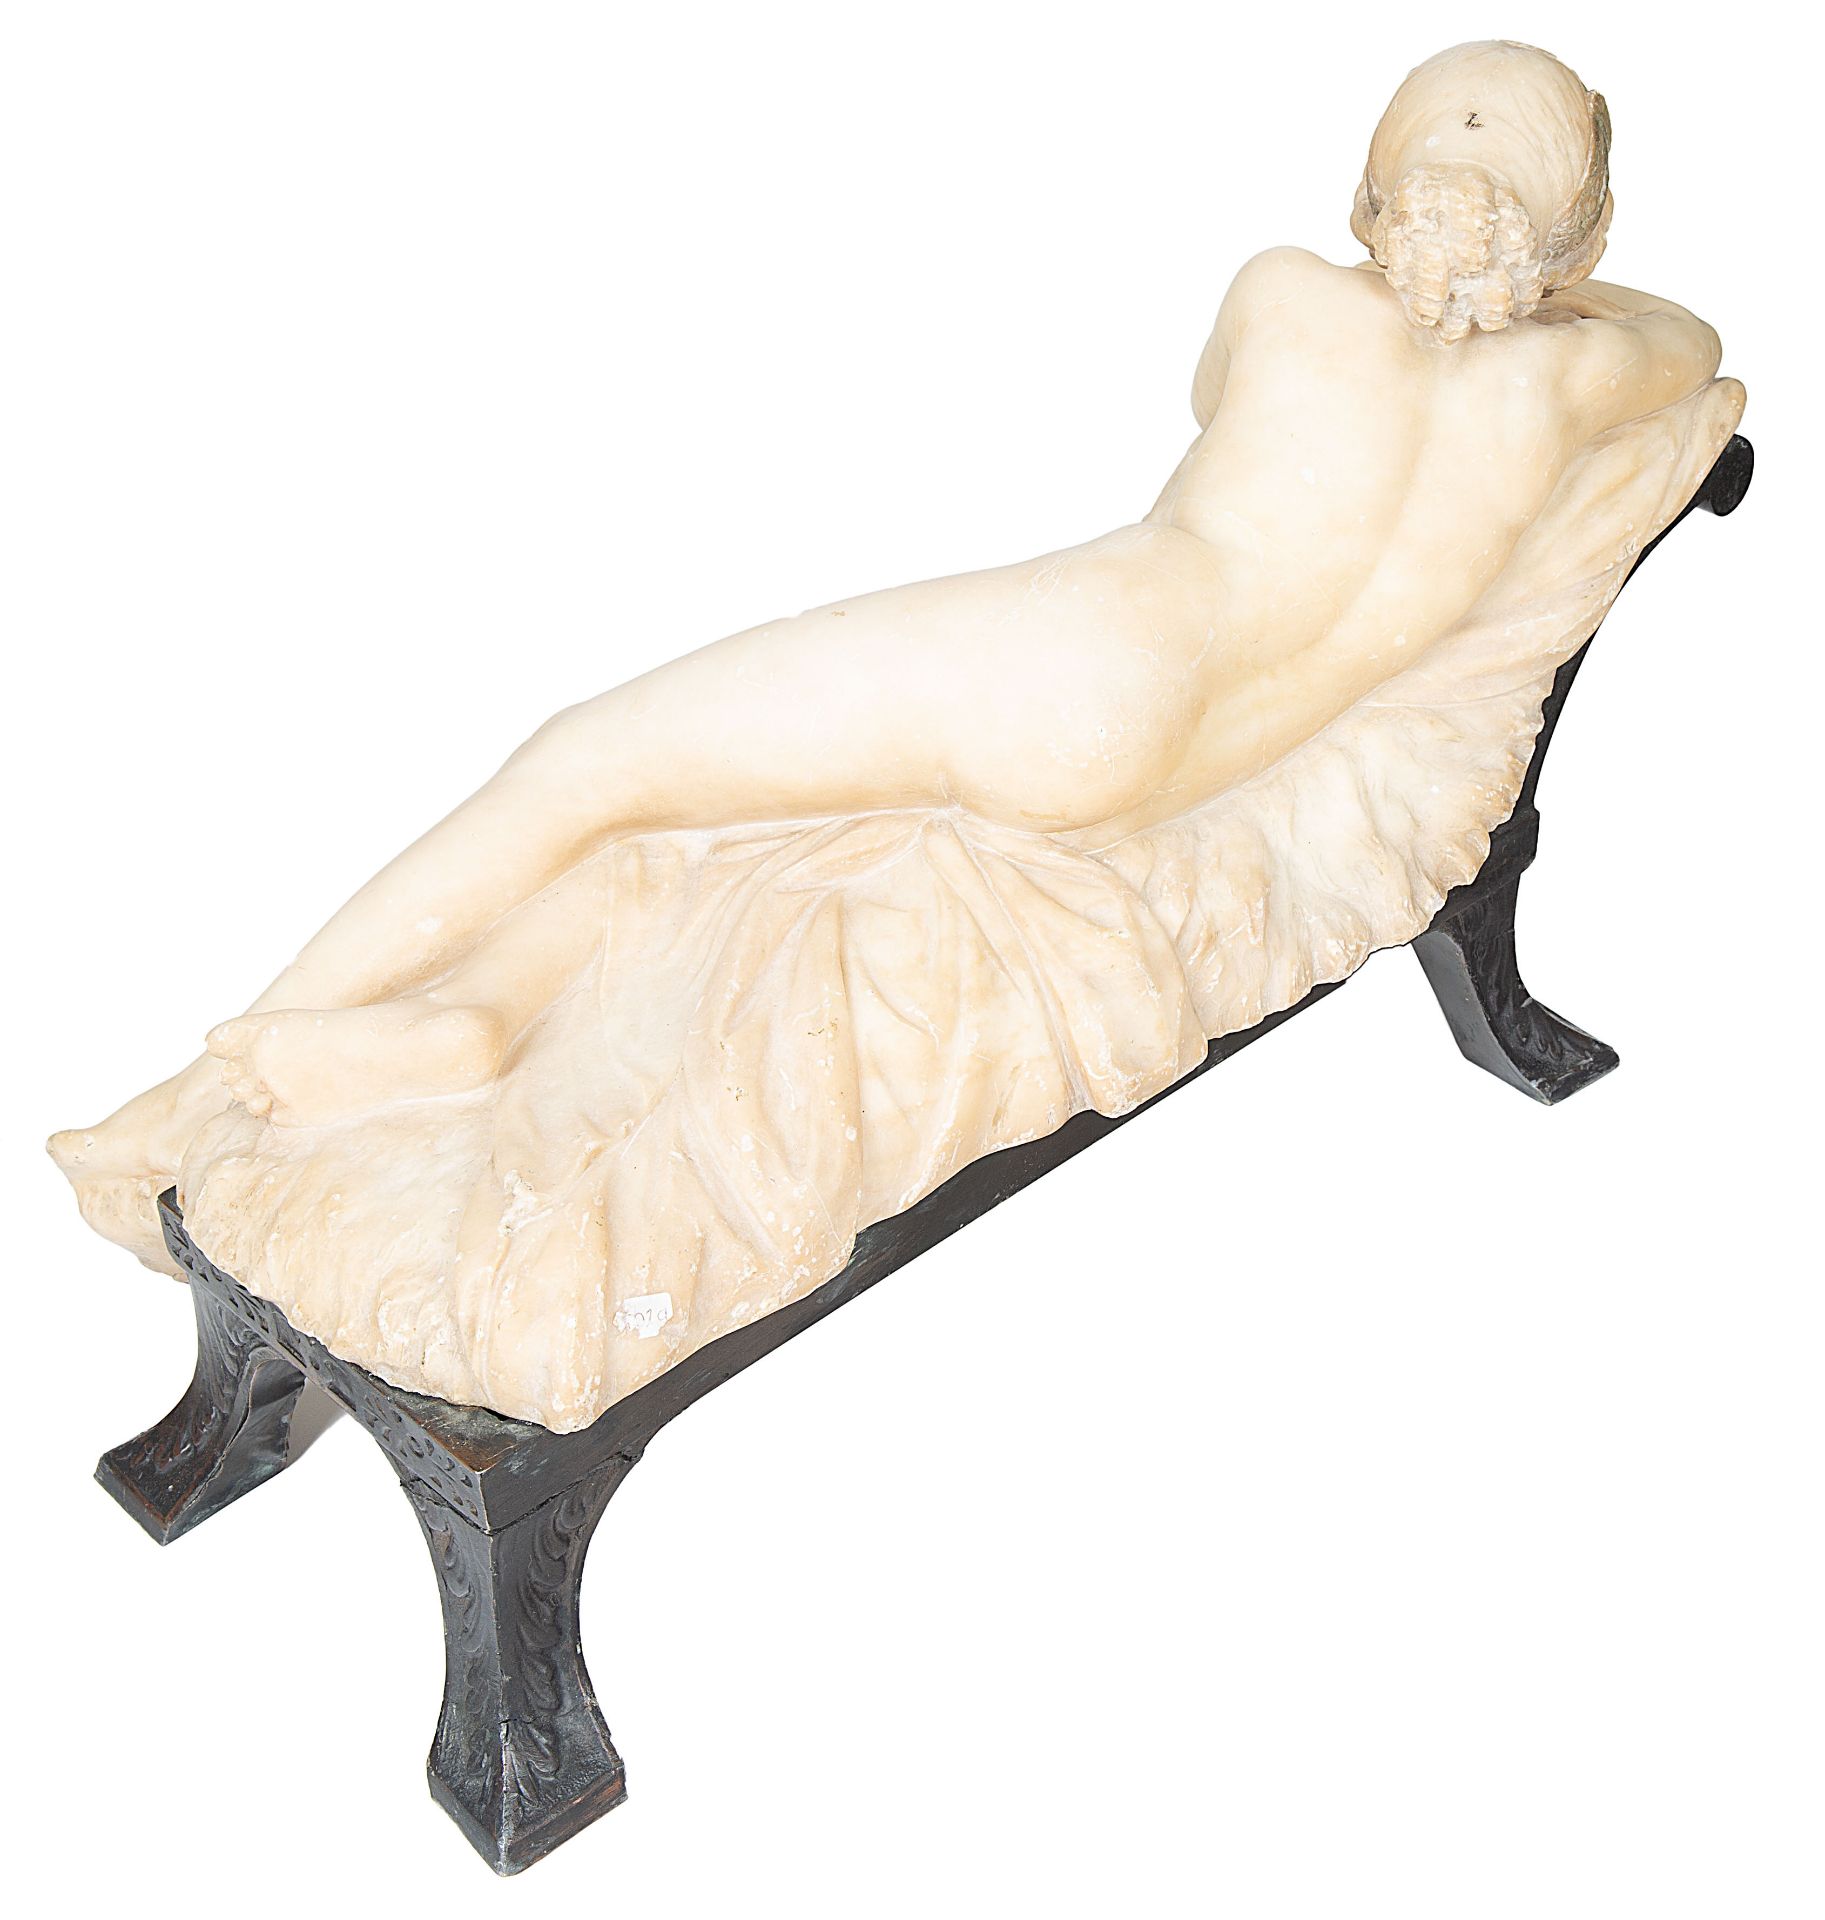 A EUROPEAN ALABASTER AND METAL SCULPTURE OF A NUDE, LATE 19TH-EARLY 20TH CENTURY - Bild 2 aus 2